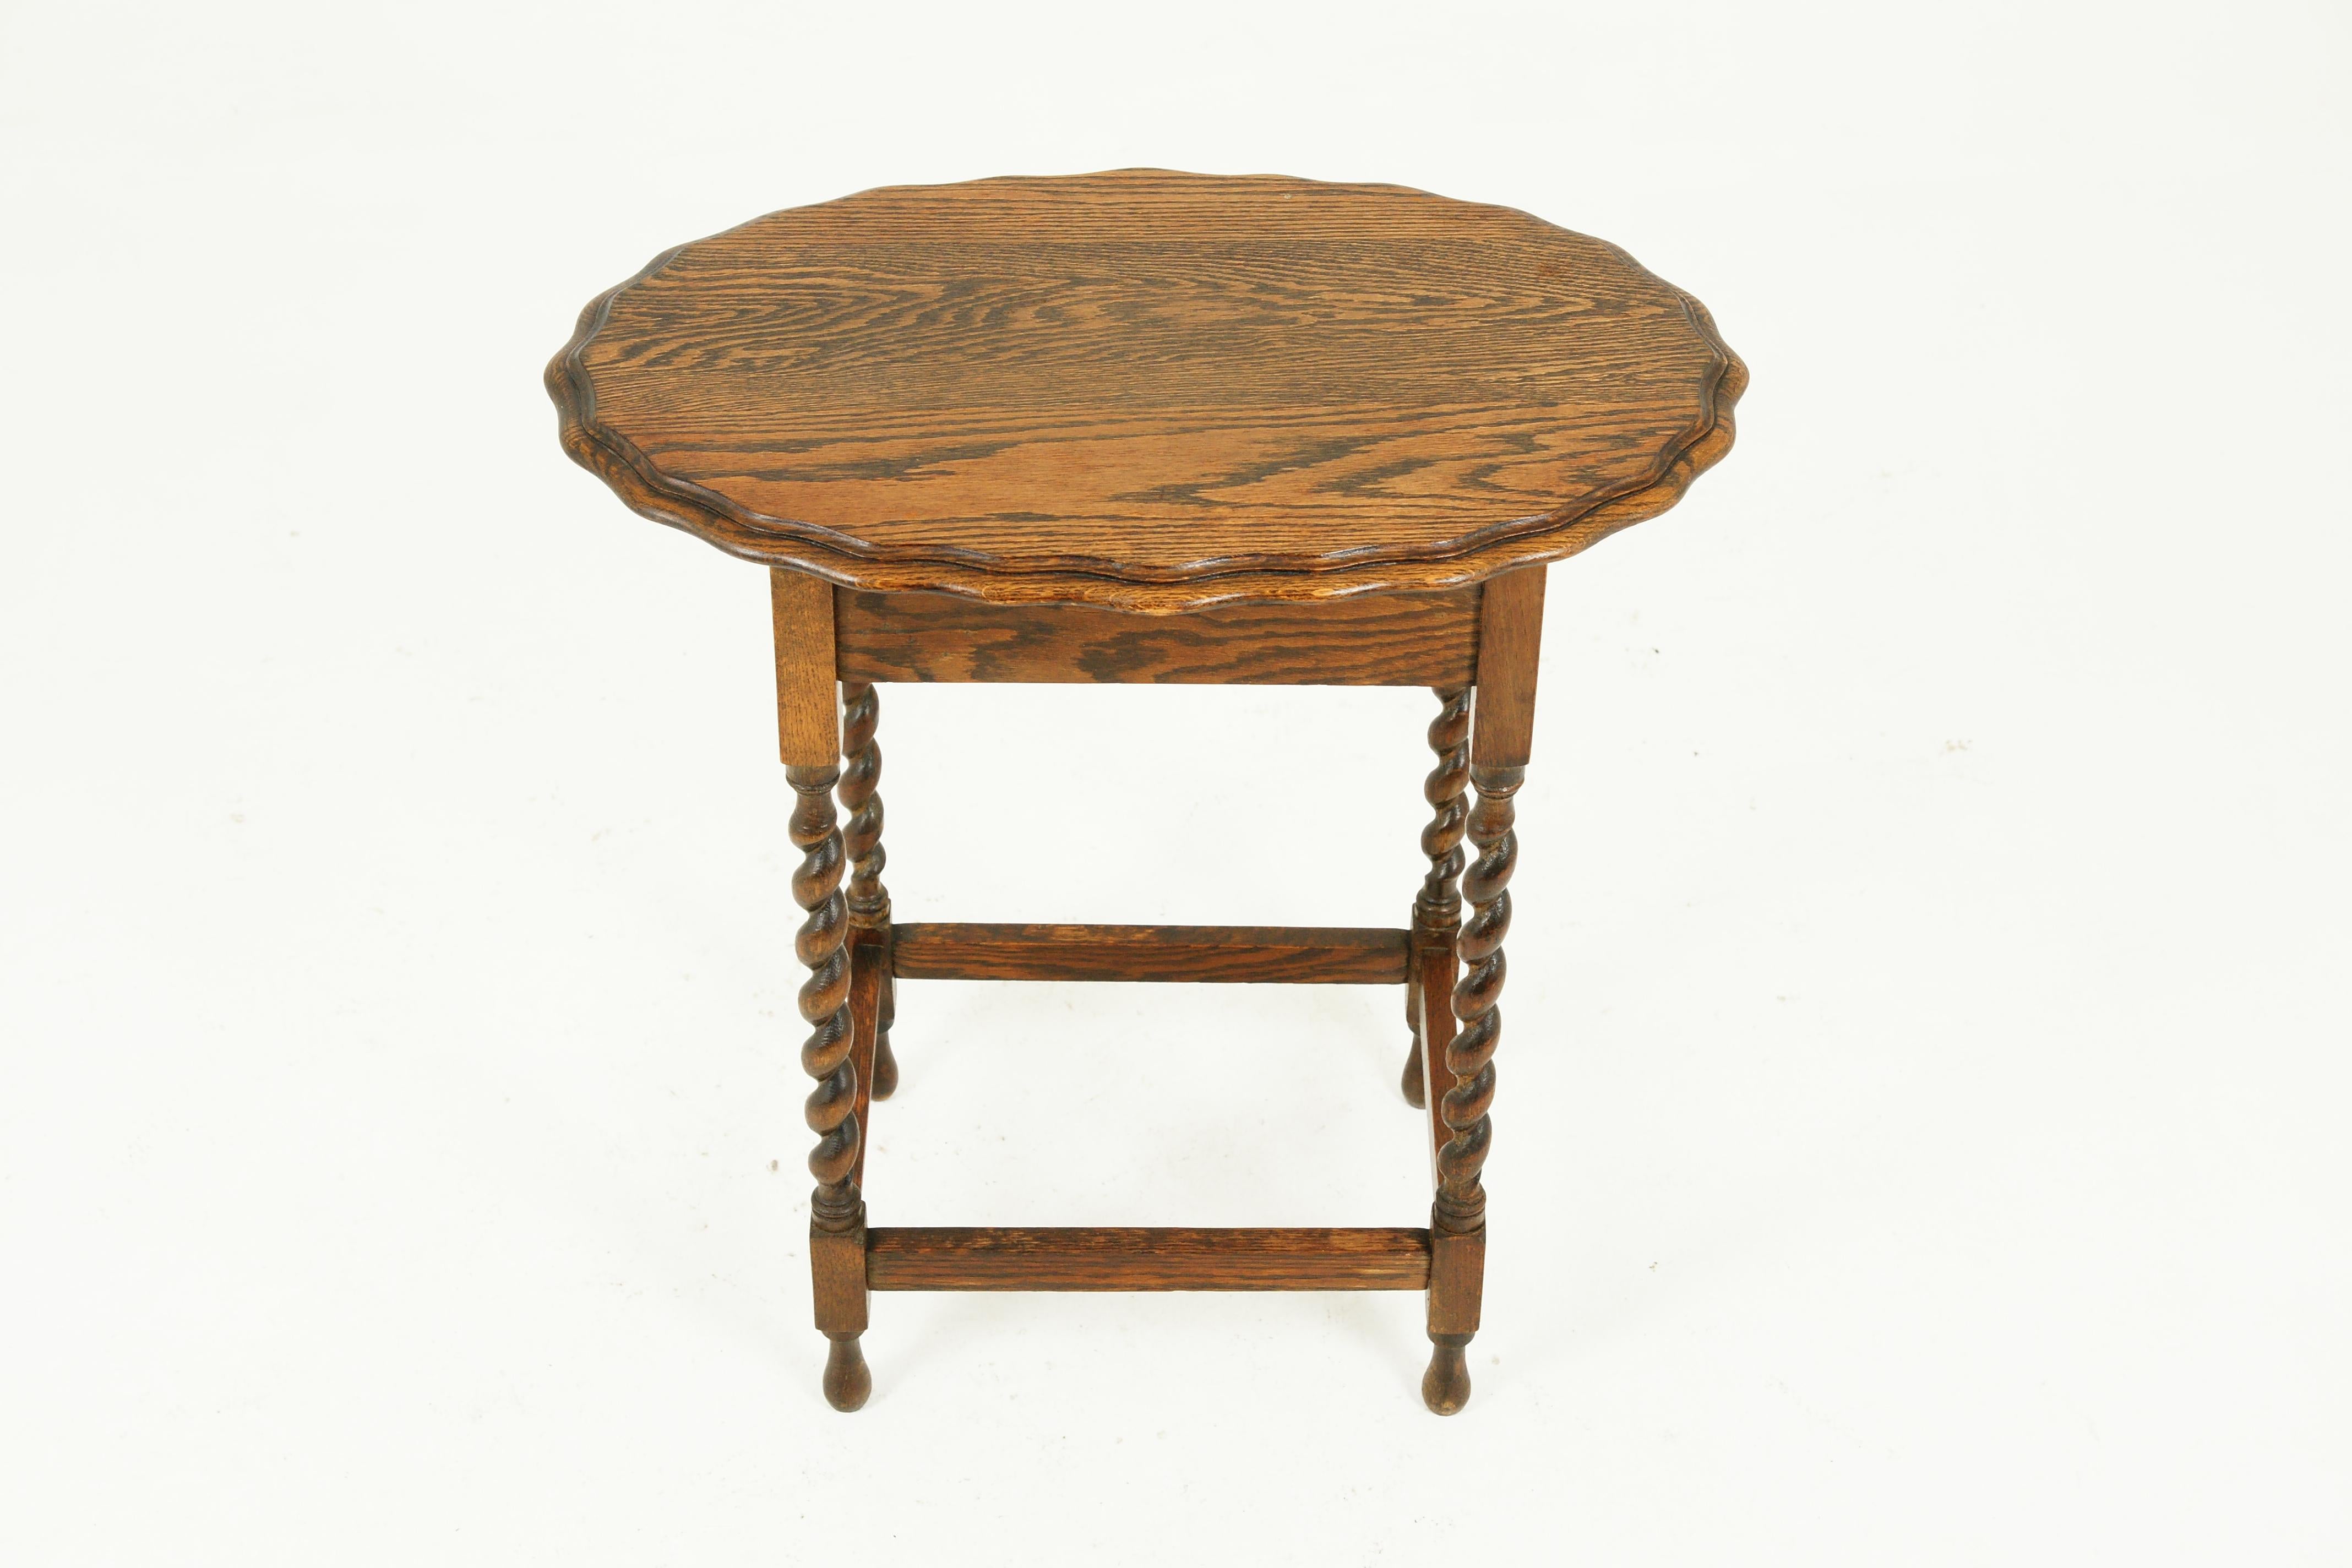 Antique oval barley twist table, lamp table, Scotland 1930, B2419

Scotland 1930
Solid oak
Original finish
Oval top with pie beveled edge
All standing on four barley twist legs
Connected by stretchers
Nice quality and in good condition
All